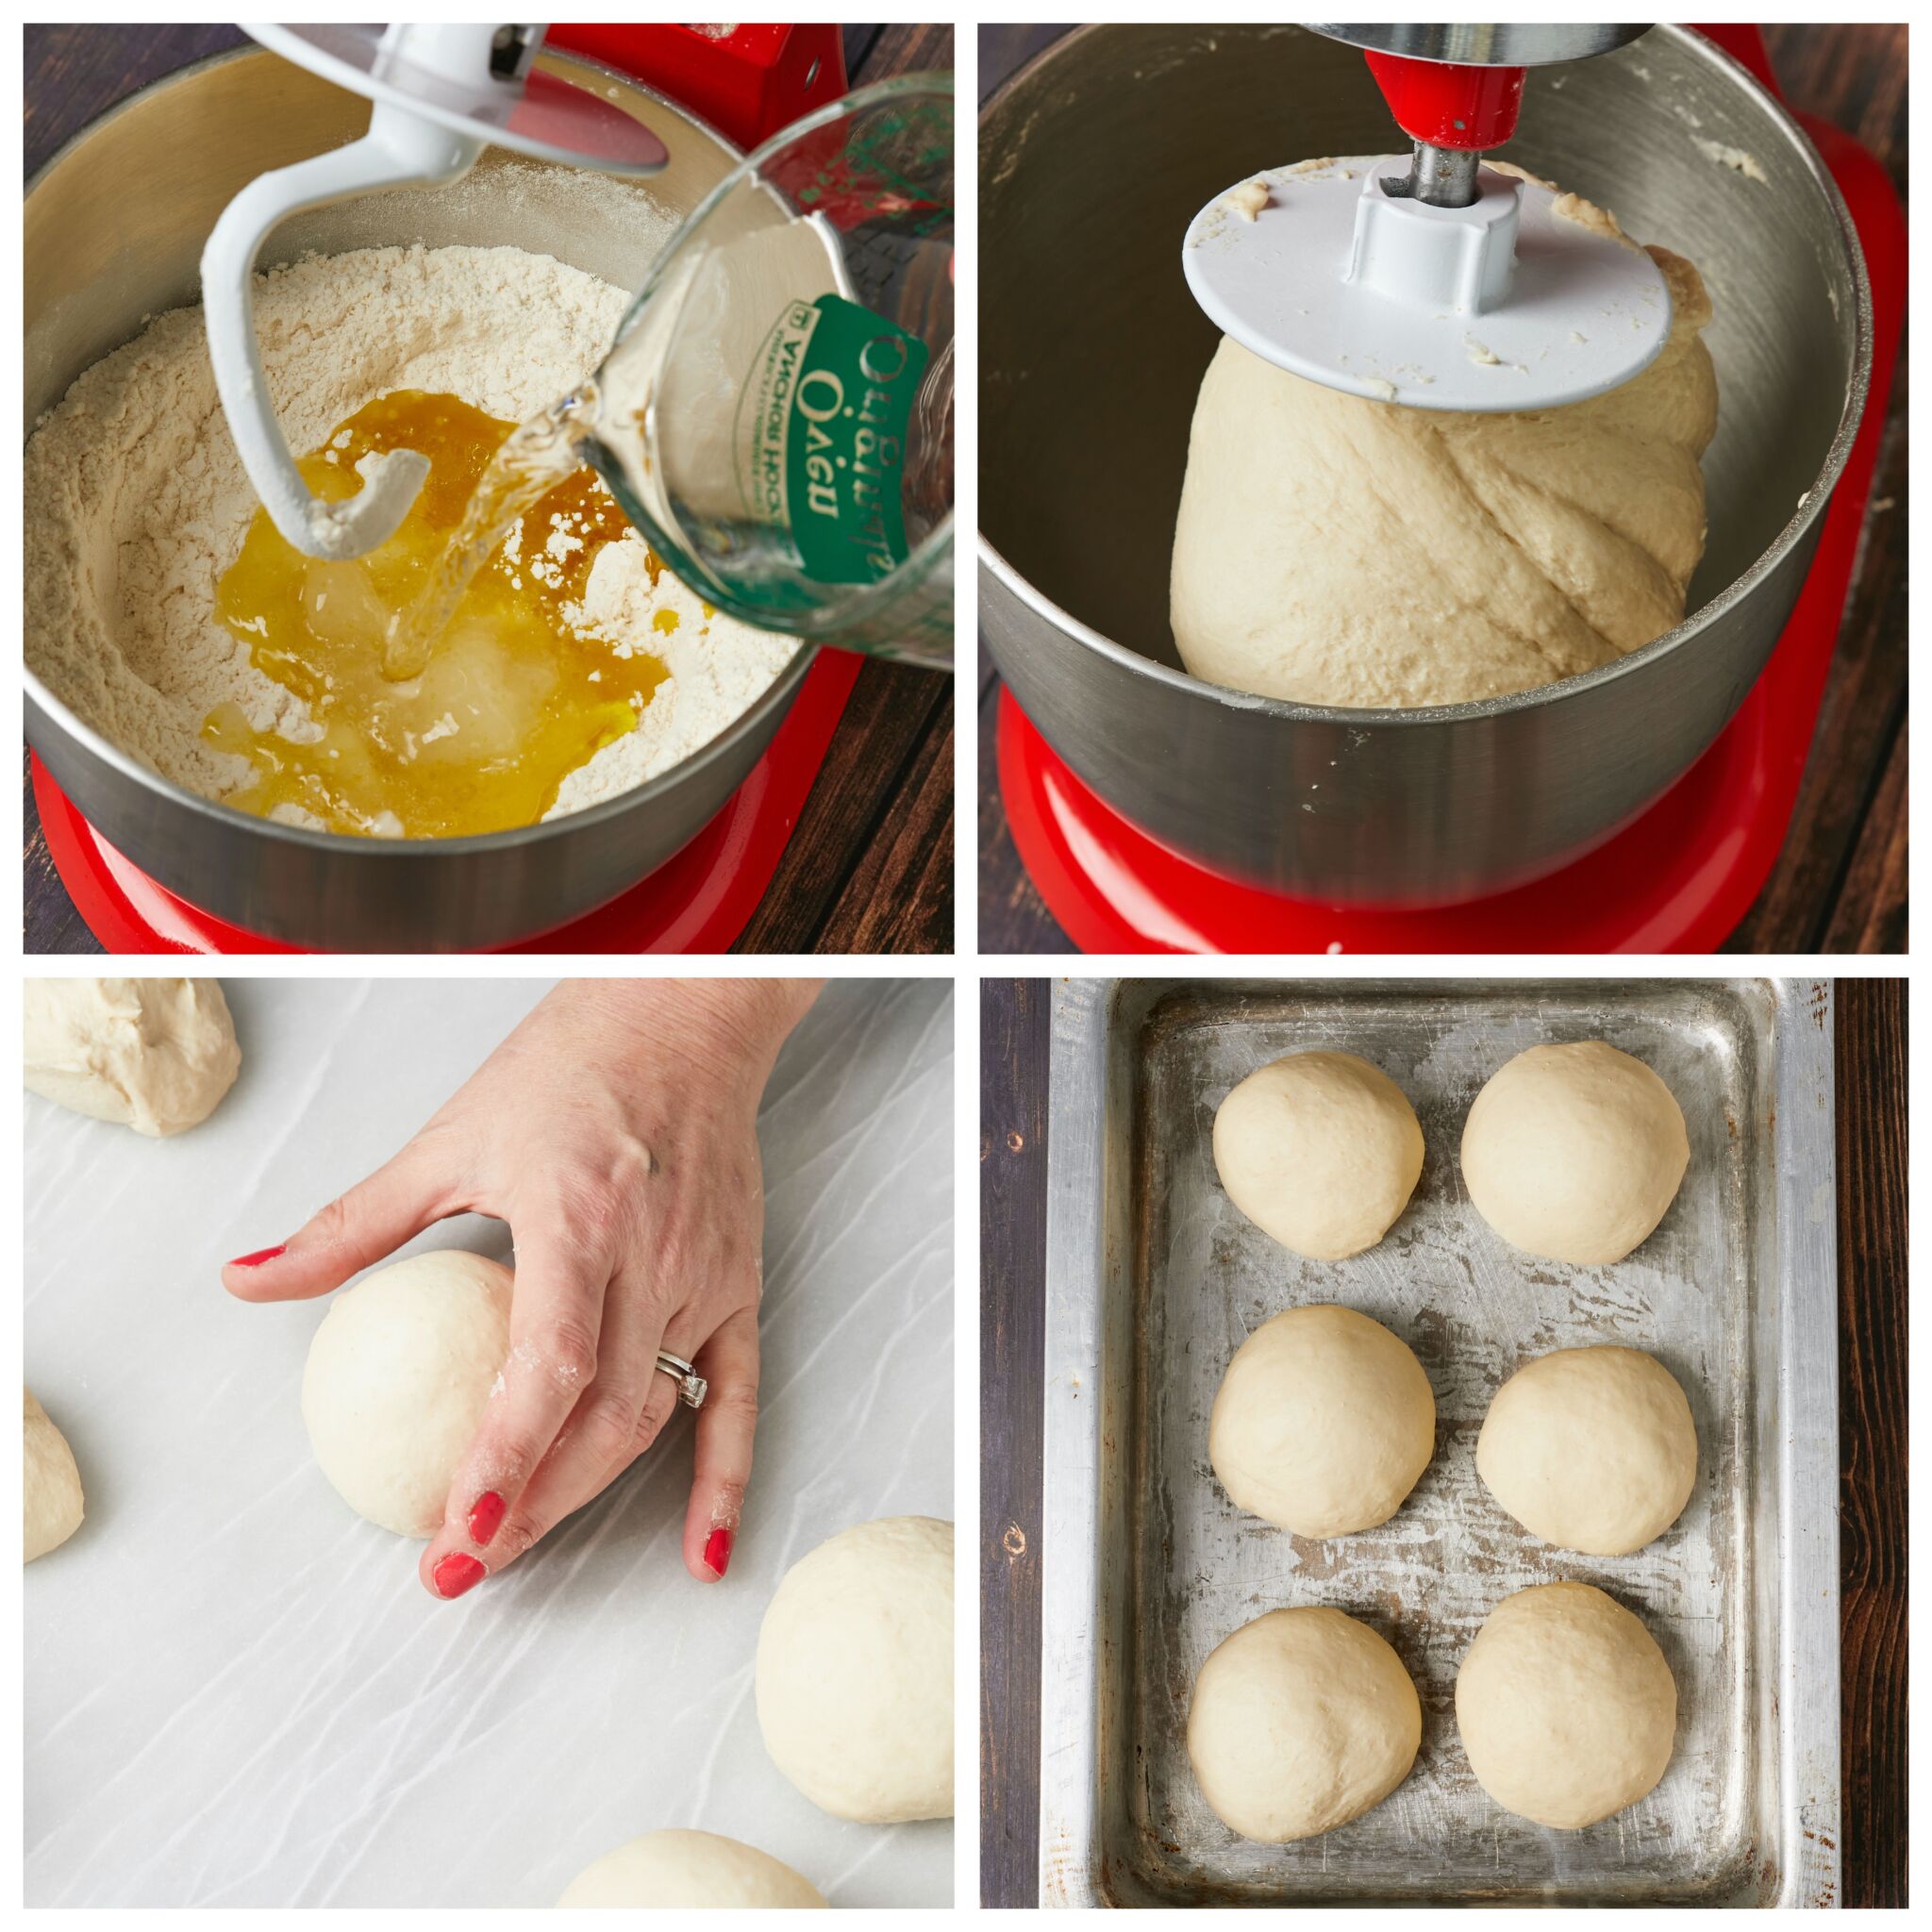 Step-by-step instruction on how to make the Easiest Pizza Dough Recipe. First mix dry ingredients separately then stream in water and olive oil JUST until all forms a smooth and elastic dough. Divide the dough and shape them into individual balls then proof in a buttered baking tray on lightly-floured parchment paper. 